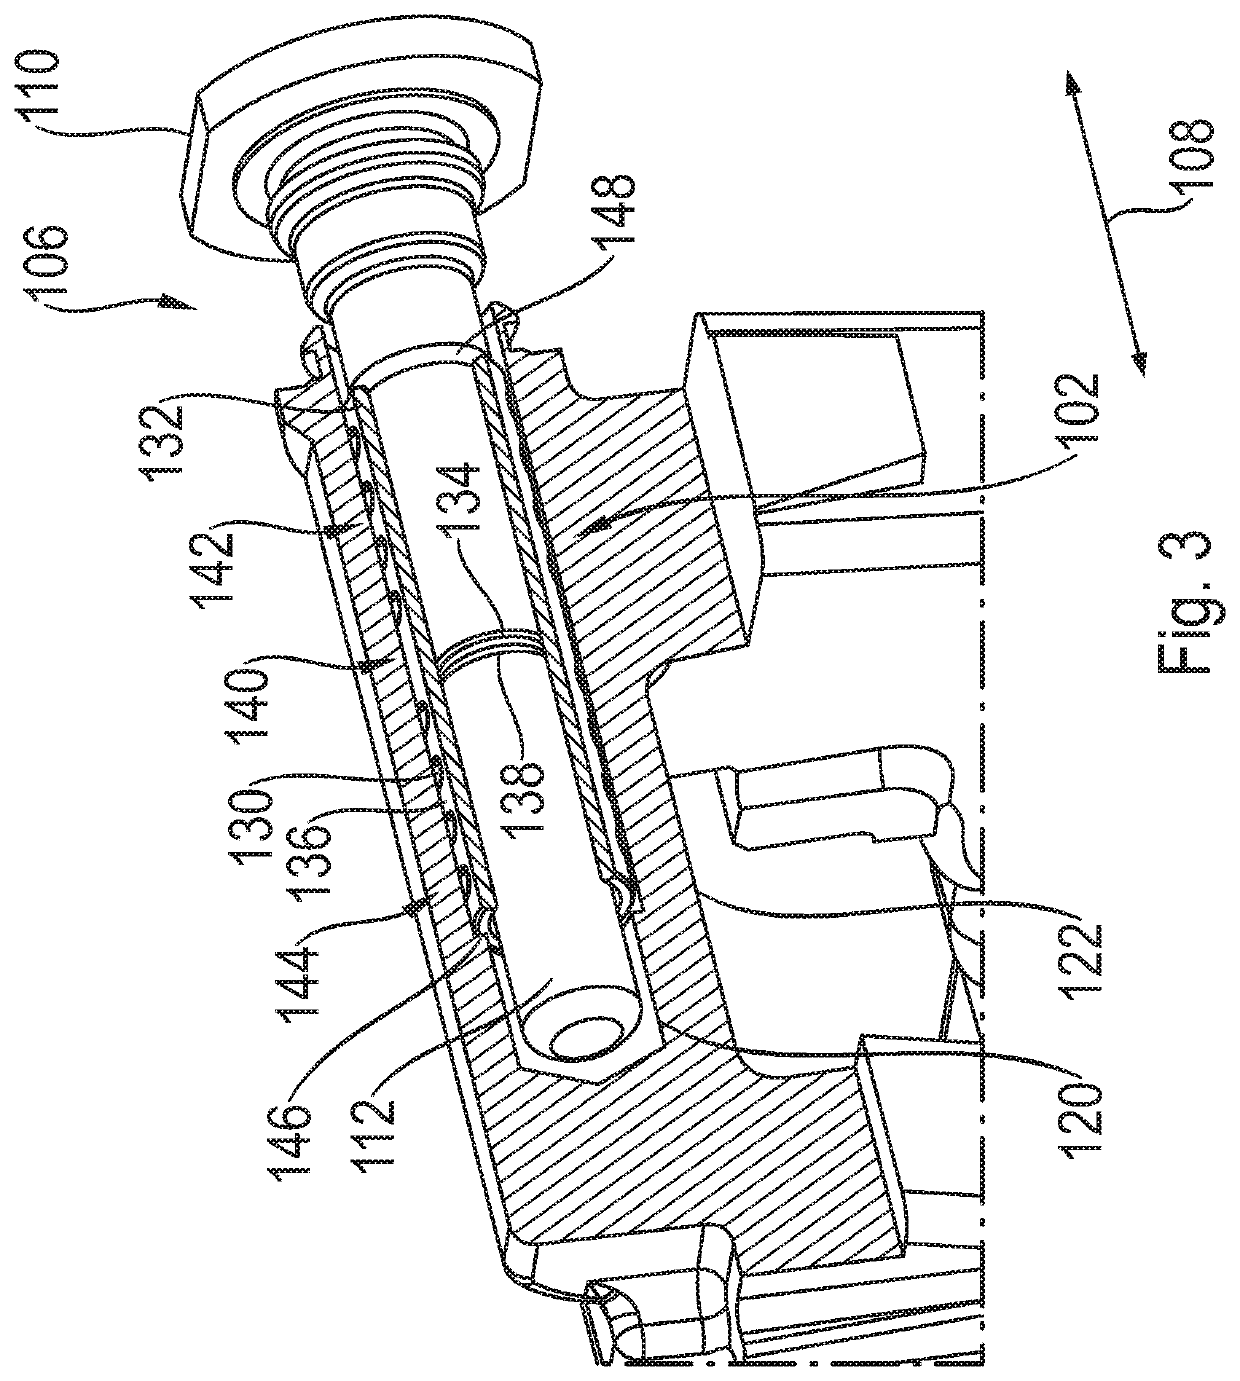 Sliding mechanism for guide pins of a disc brake assembly